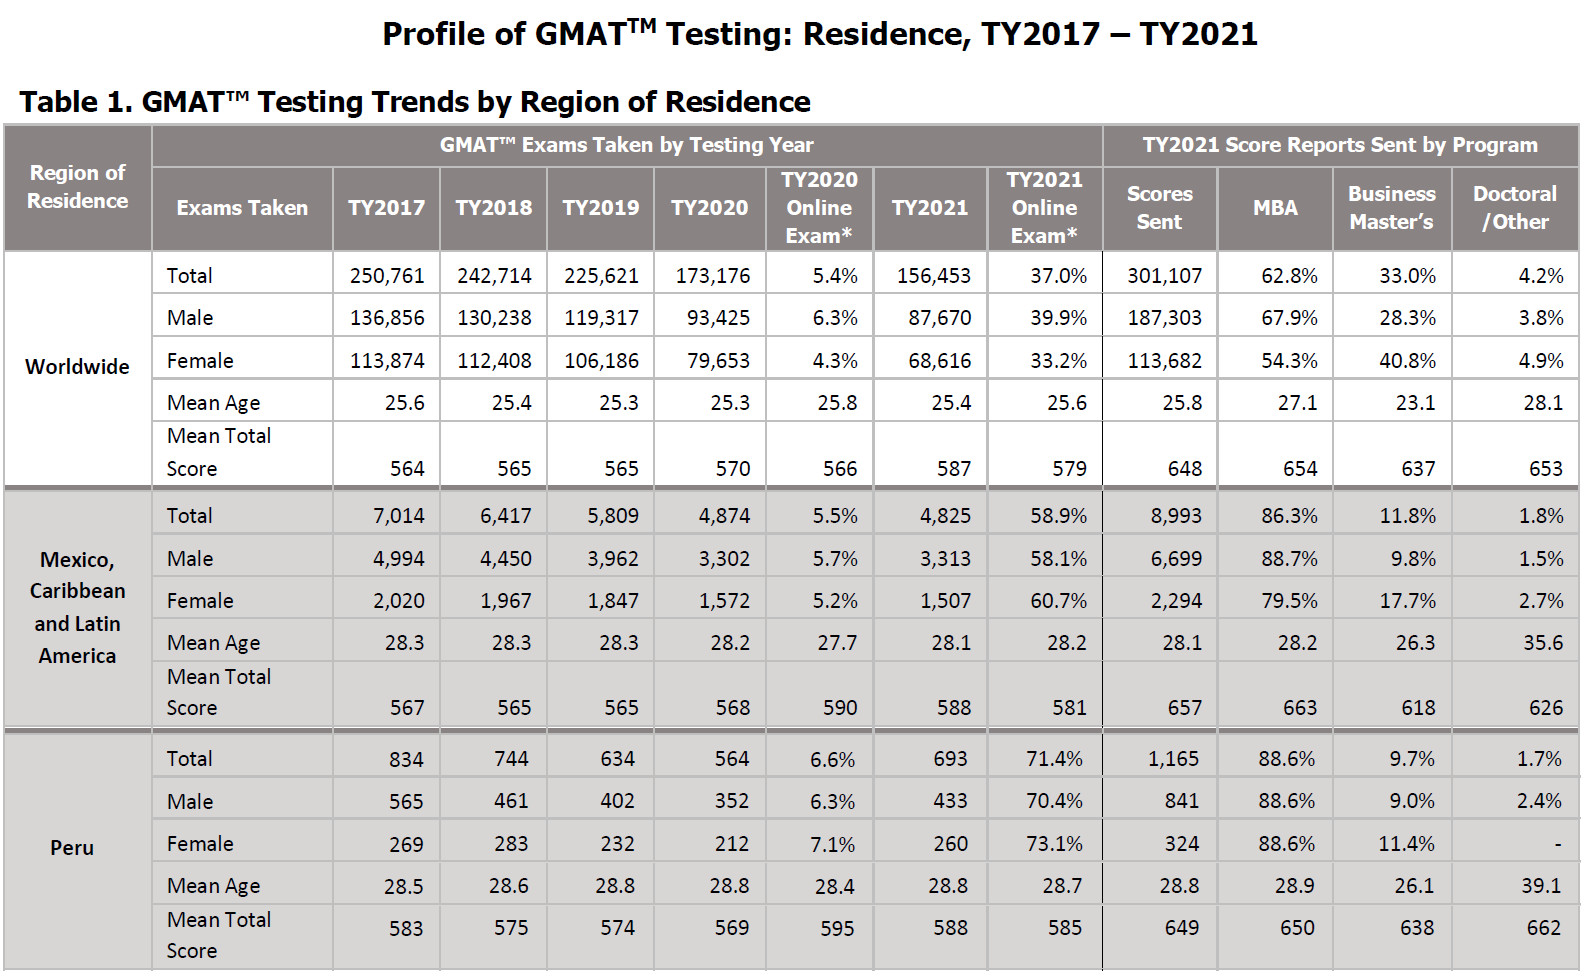 Profile of GMAT Testing by Residence - TY2017-TY2021